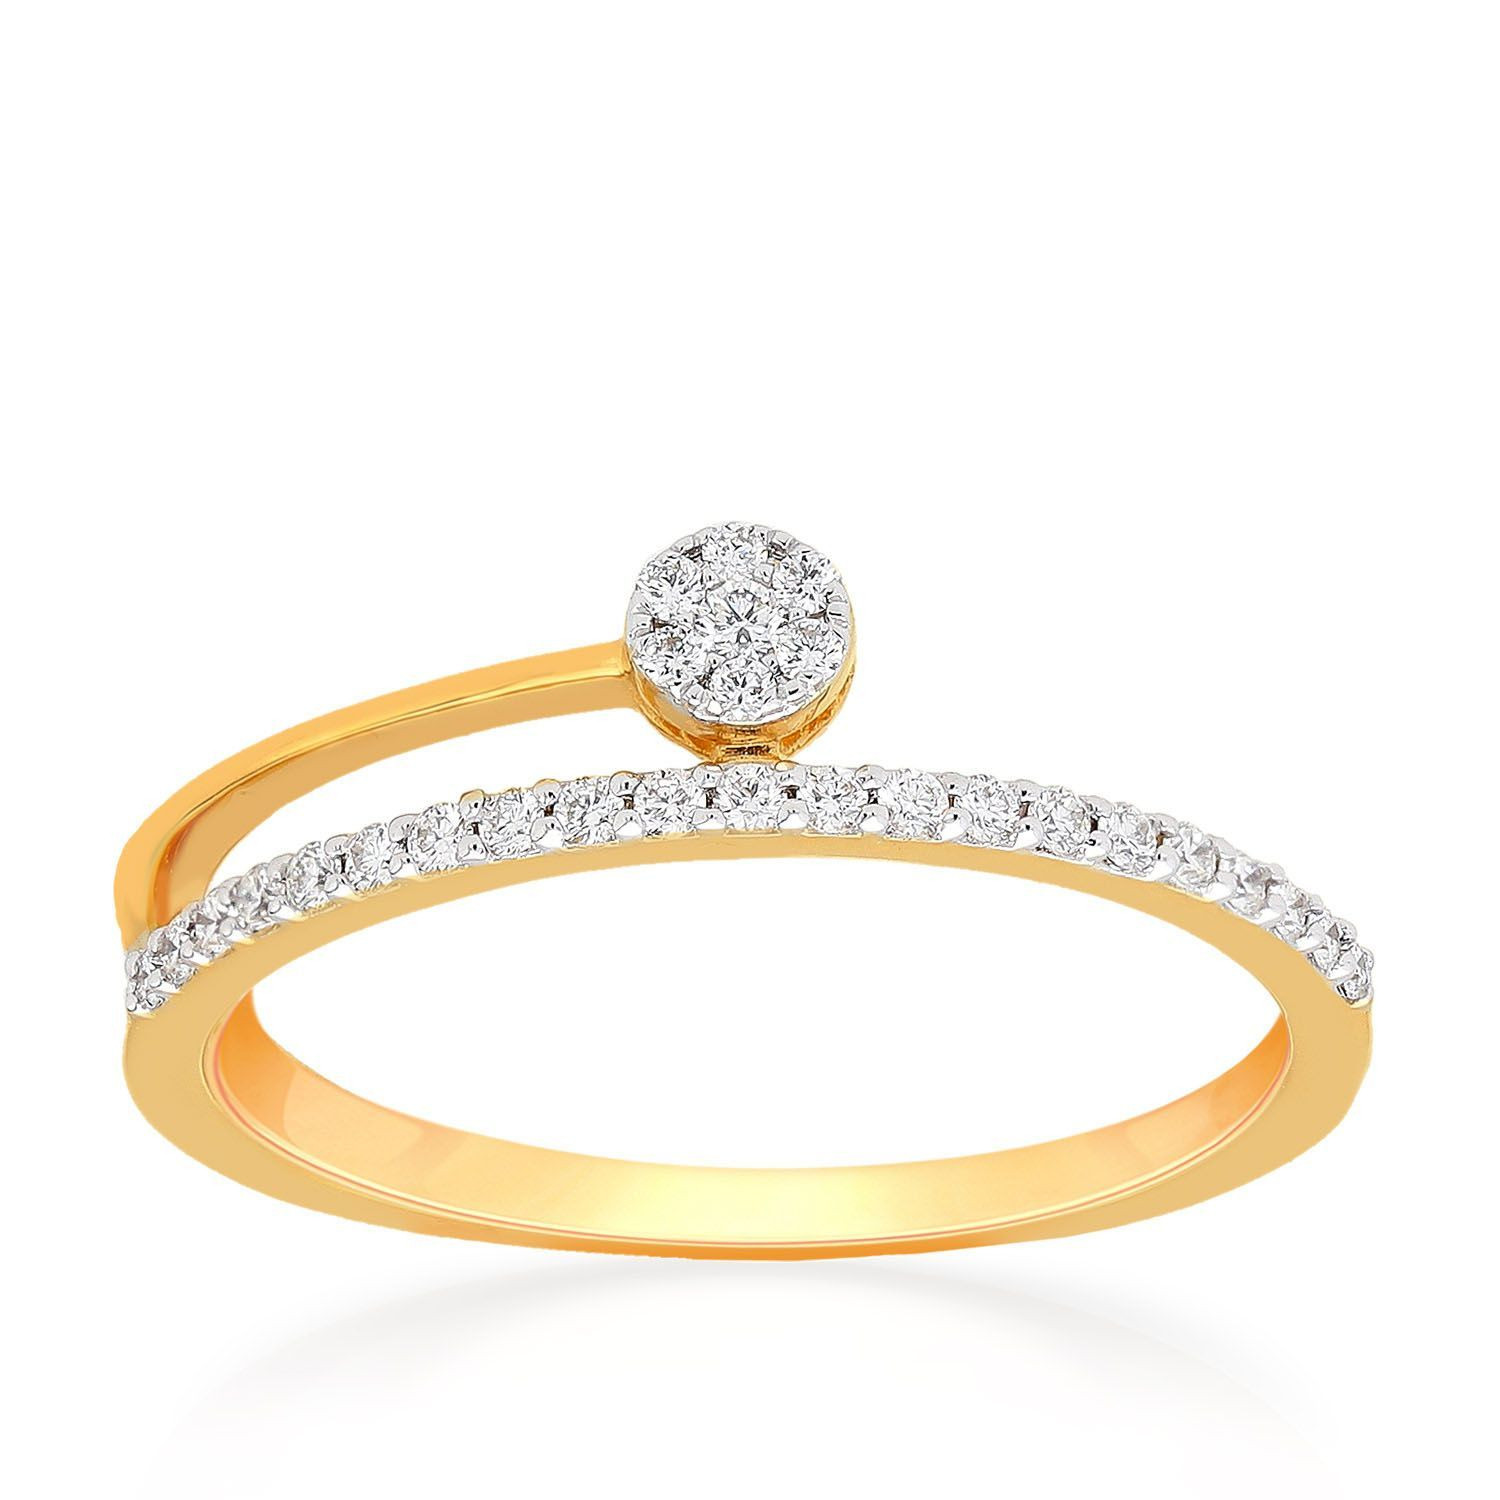 Era | Buy Era Jewellery Online | Gold, Engagement ring for her, Diamond  rings with price